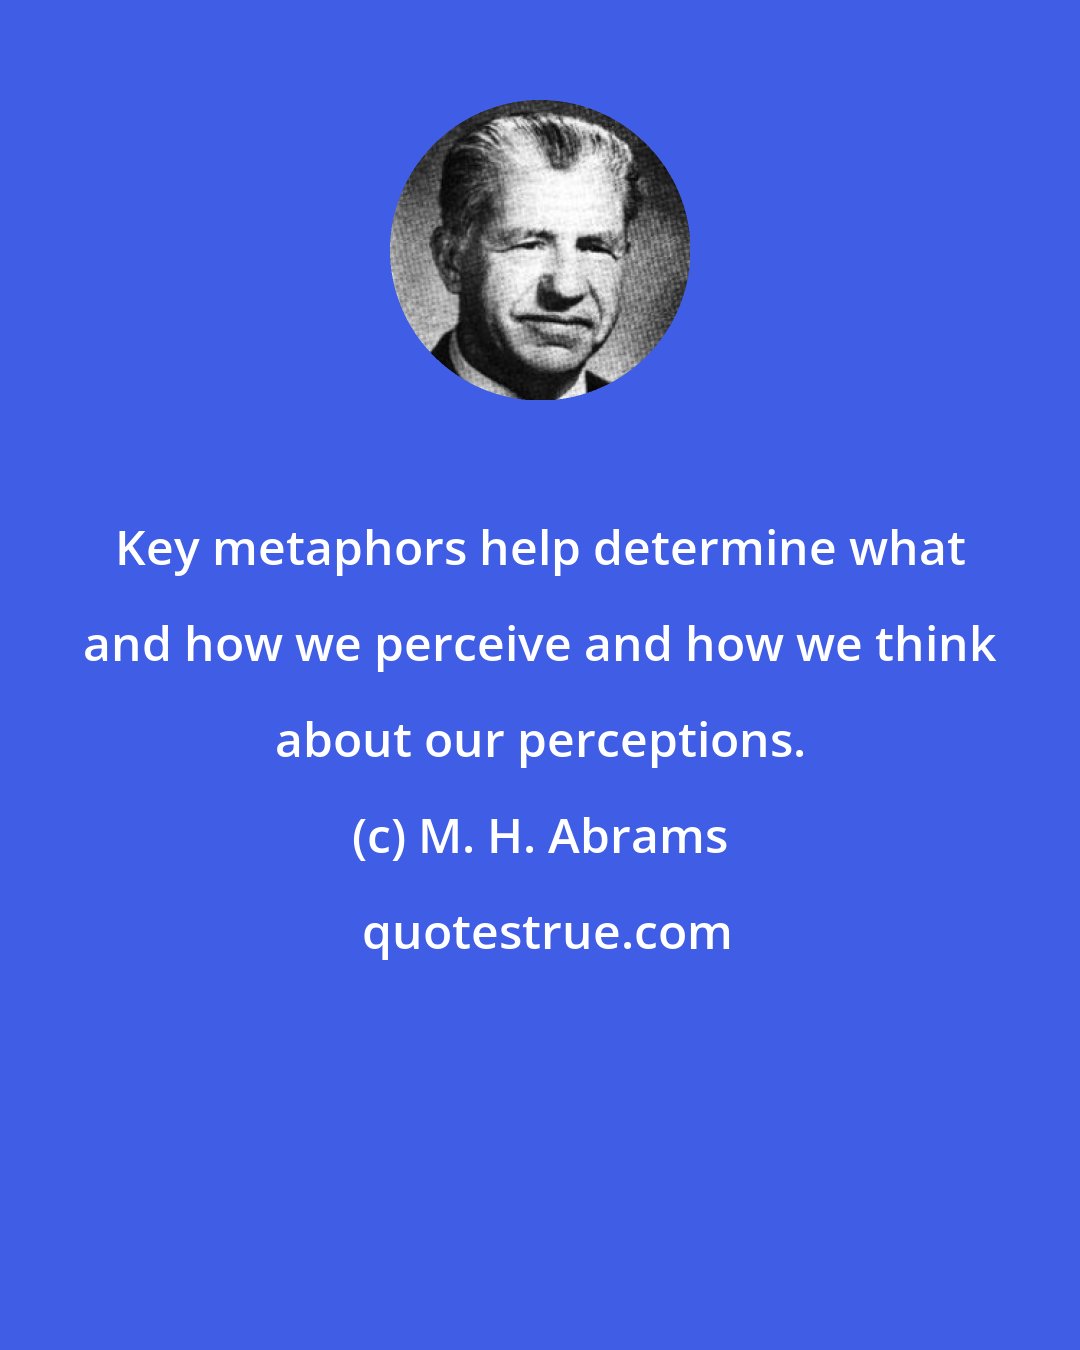 M. H. Abrams: Key metaphors help determine what and how we perceive and how we think about our perceptions.